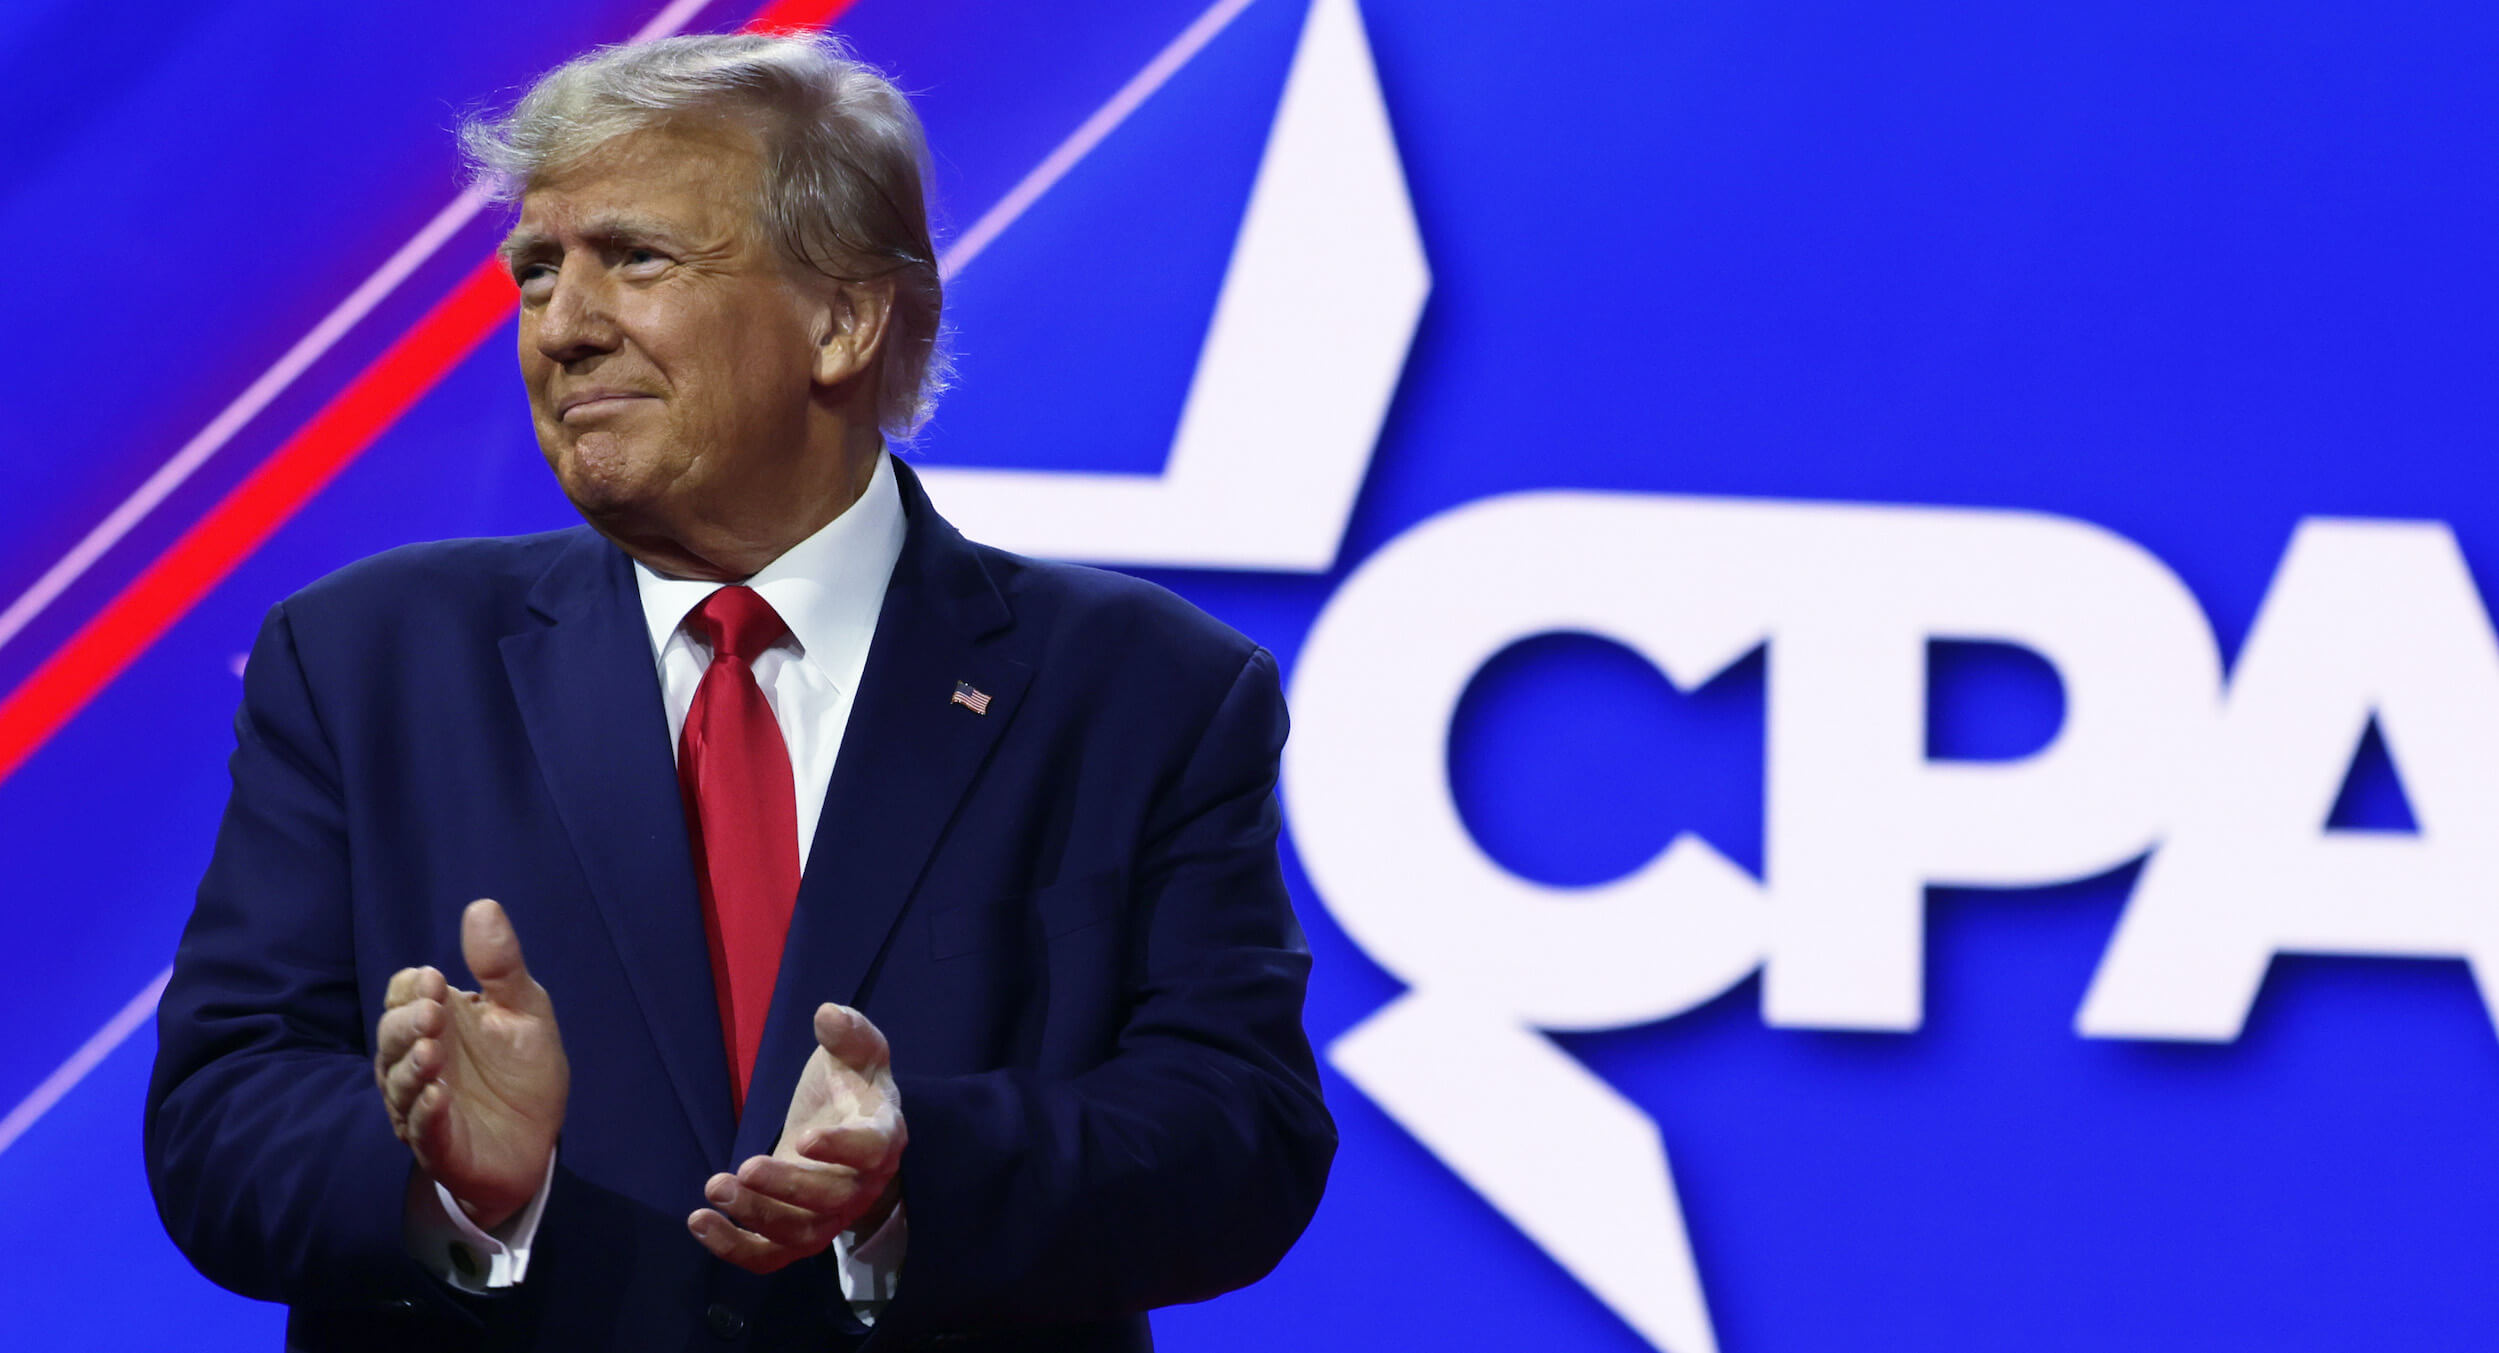 Trump Throws Down the Gauntlet at CPAC › American Greatness